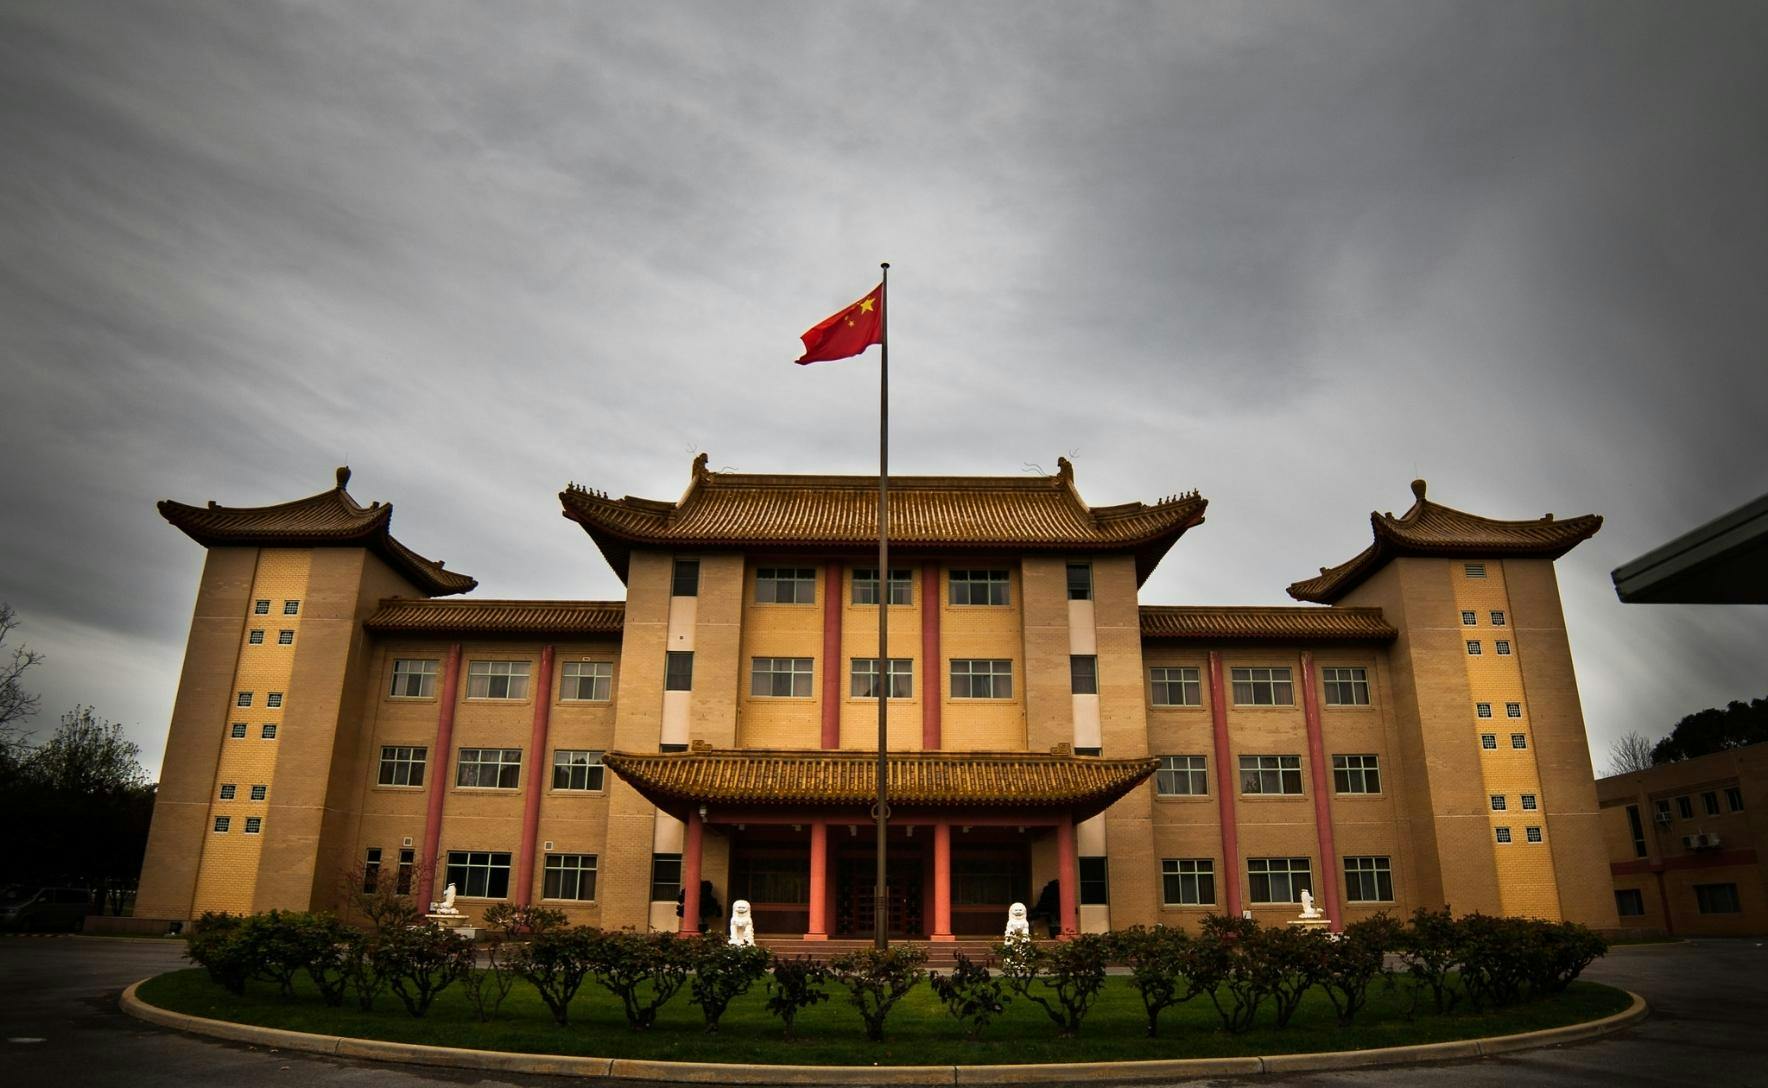 Yellow brick building with red pillars and a red and yellow Chinese flag flying in front.